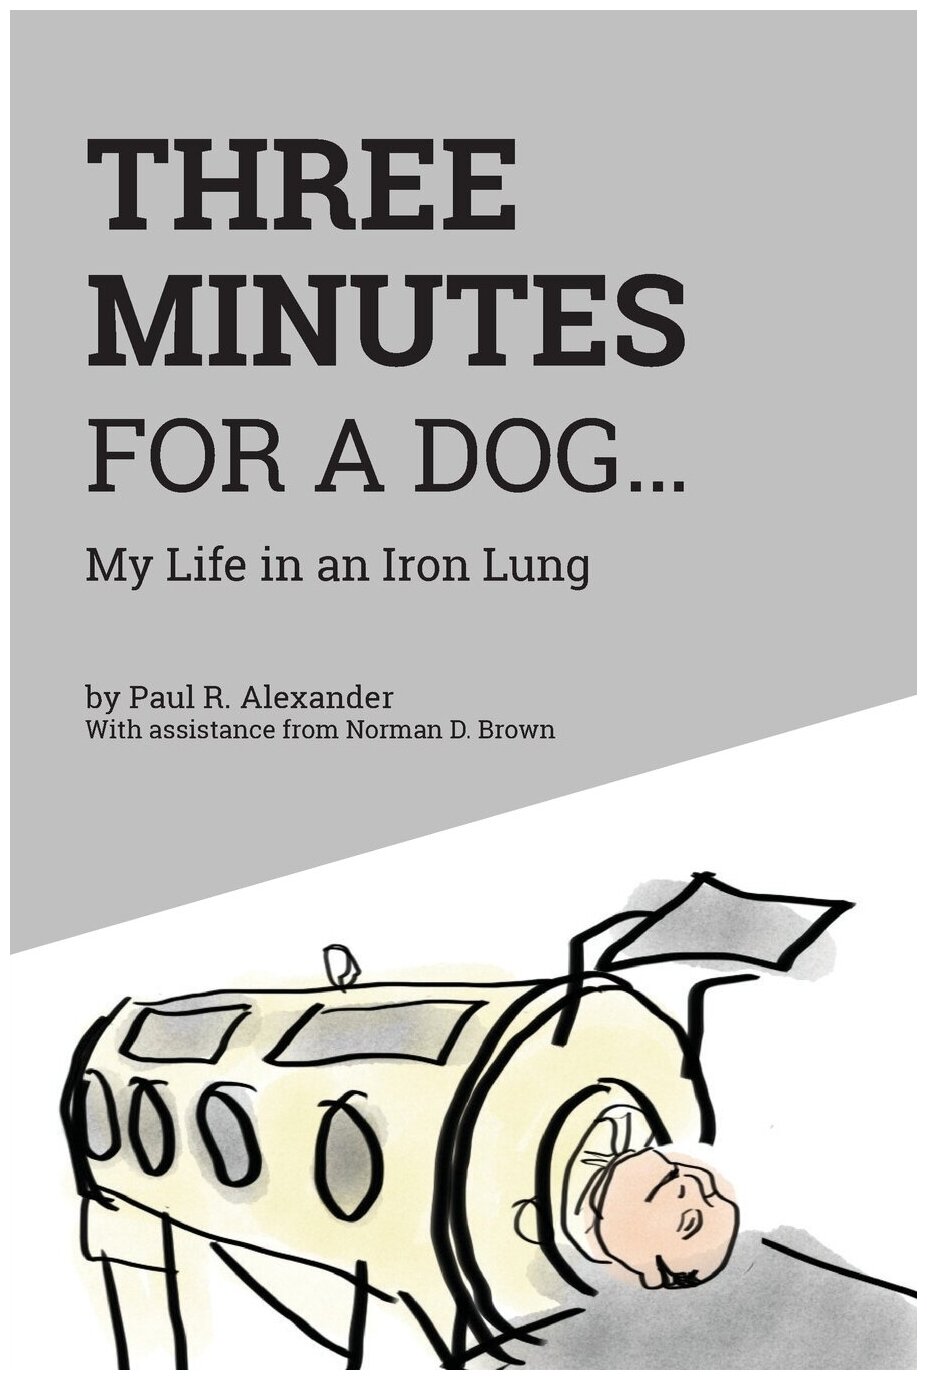 Three Minutes for a Dog. My Life in an Iron Lung